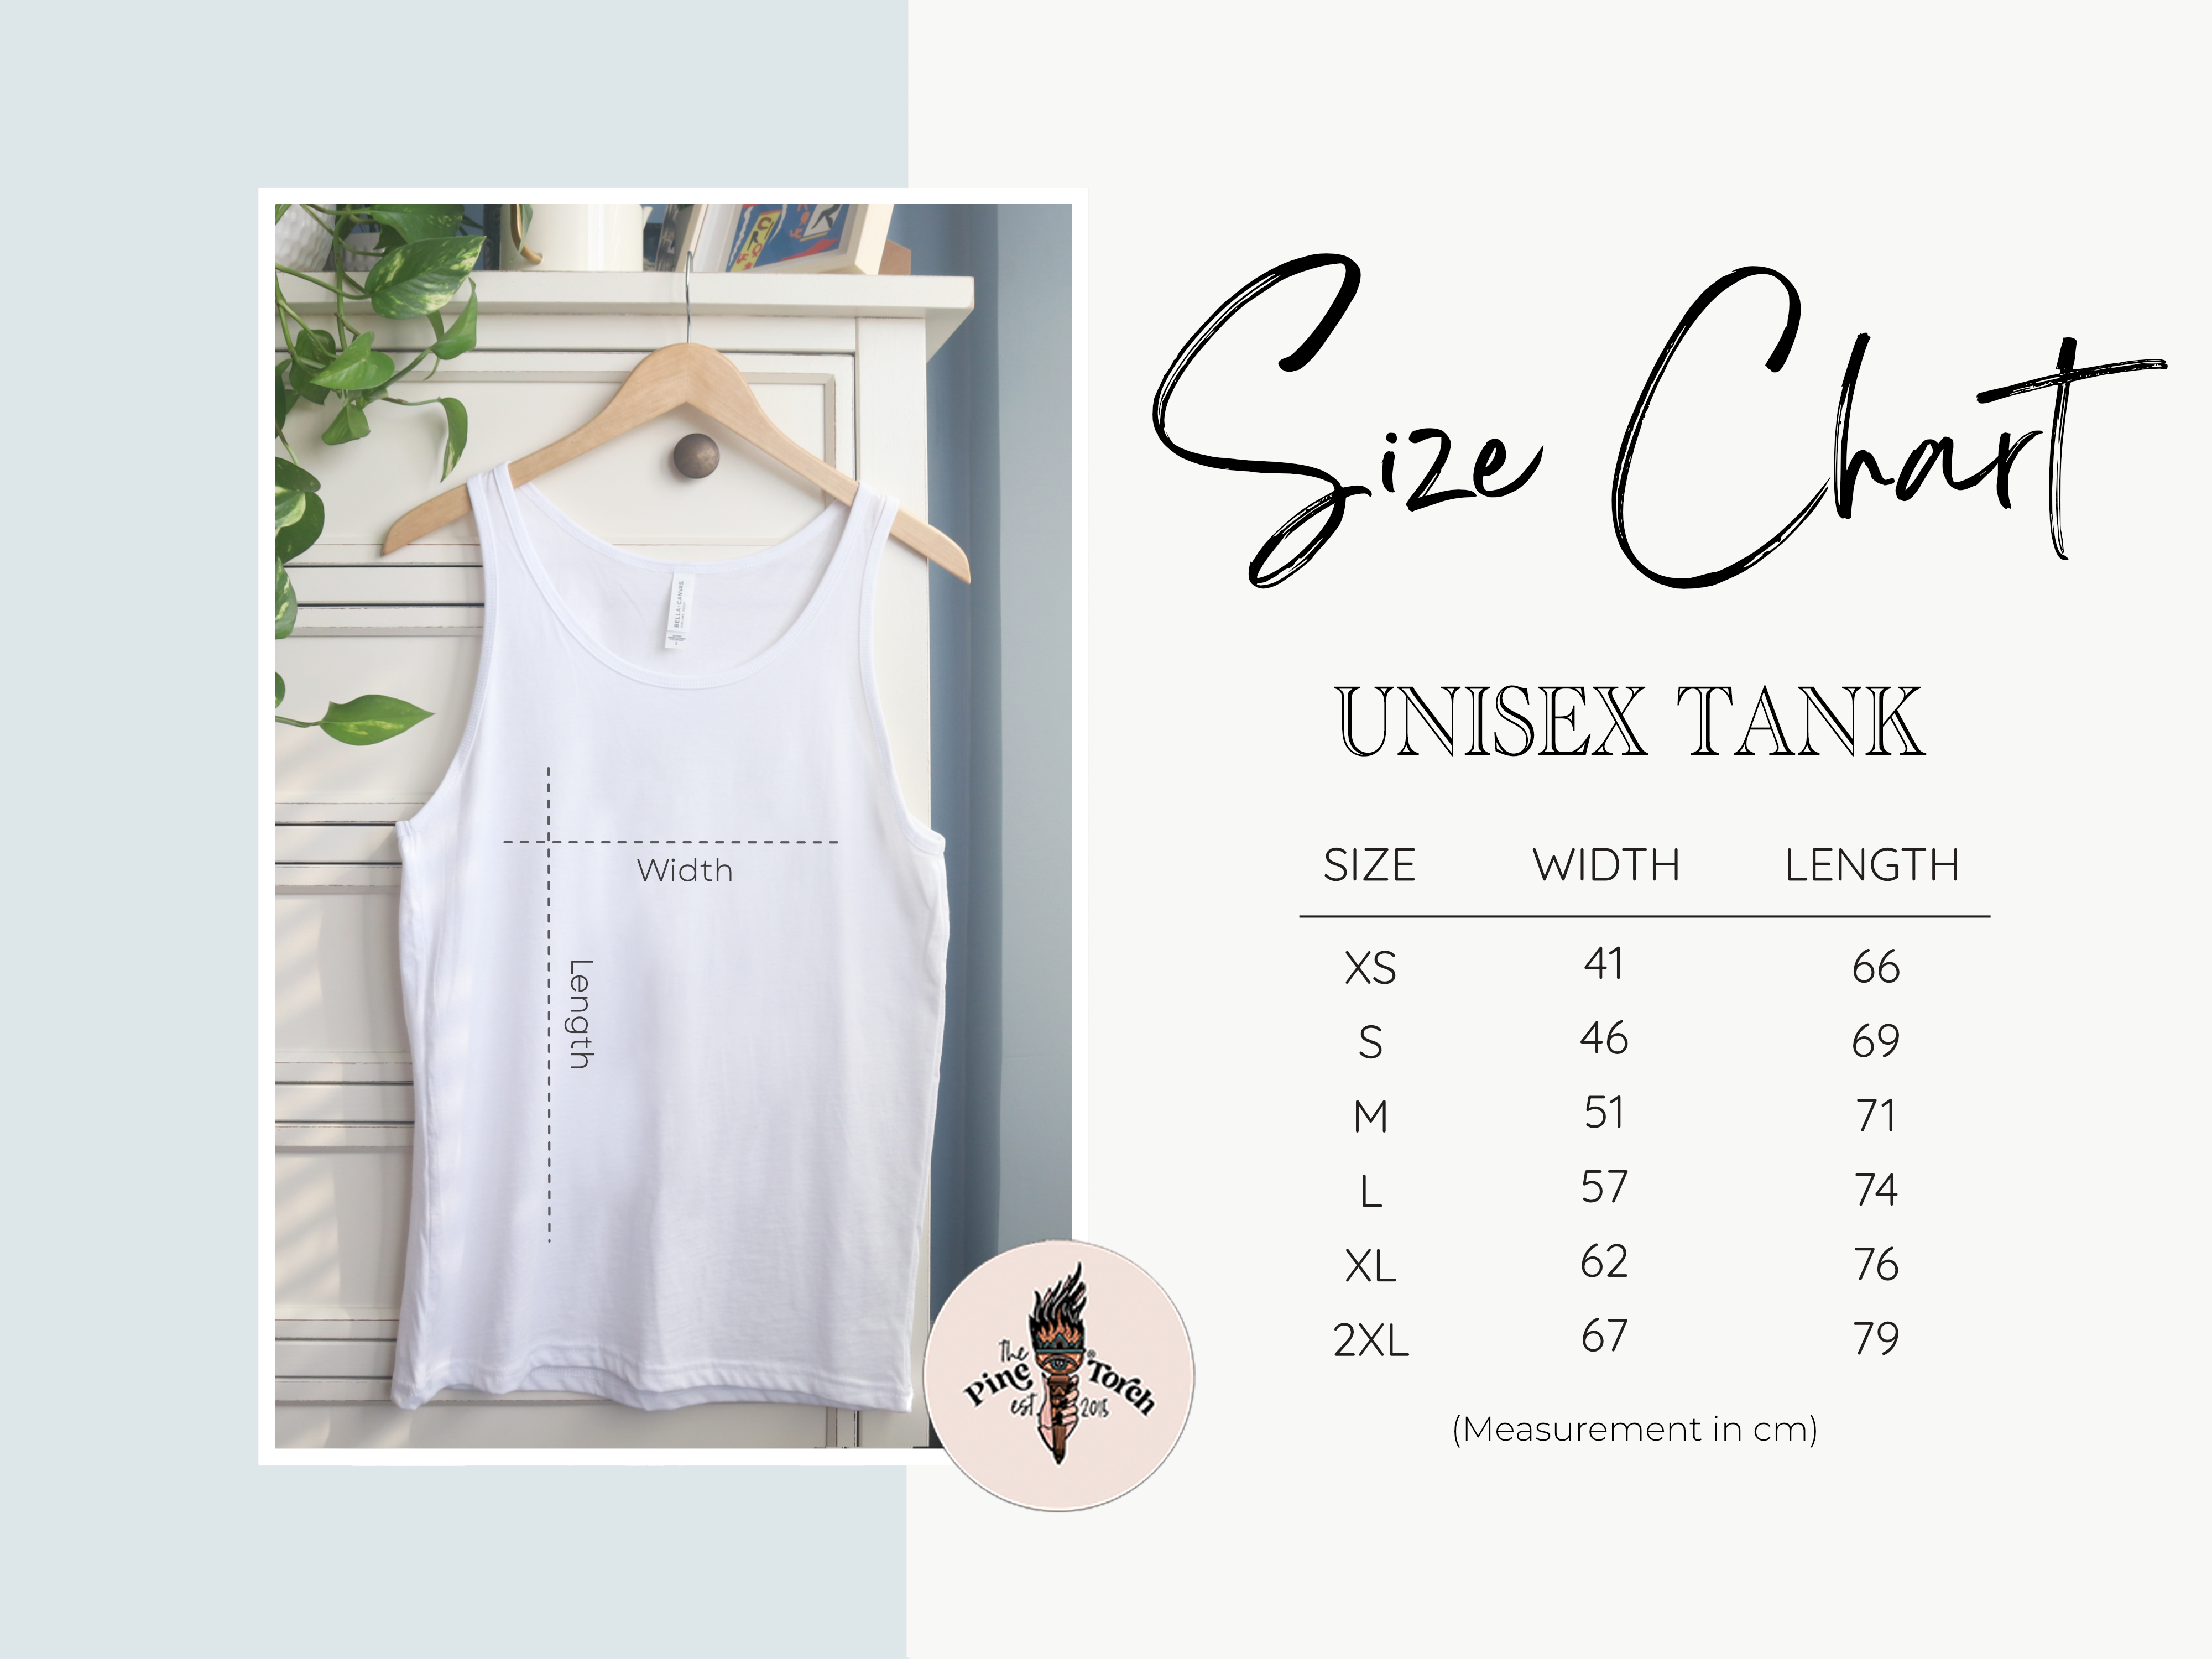 « WITCHY BOOK » UNISEX TANK